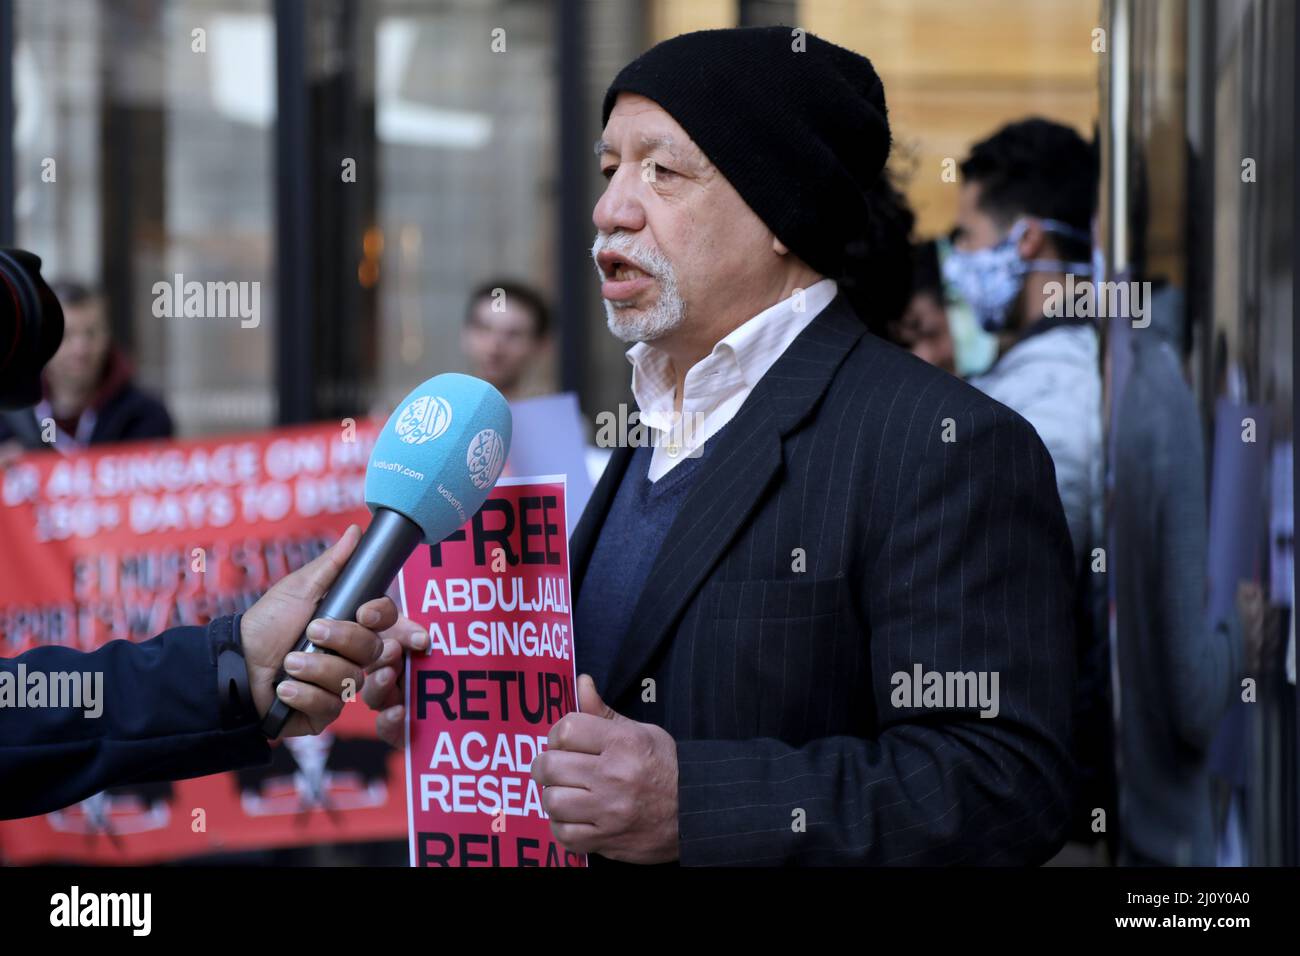 A Bahraini activist conducts a media interview during a protest outside Formula 1’s offices in London, UK on March 18, 2022, ahead of the grand prix in Bahrain Stock Photo